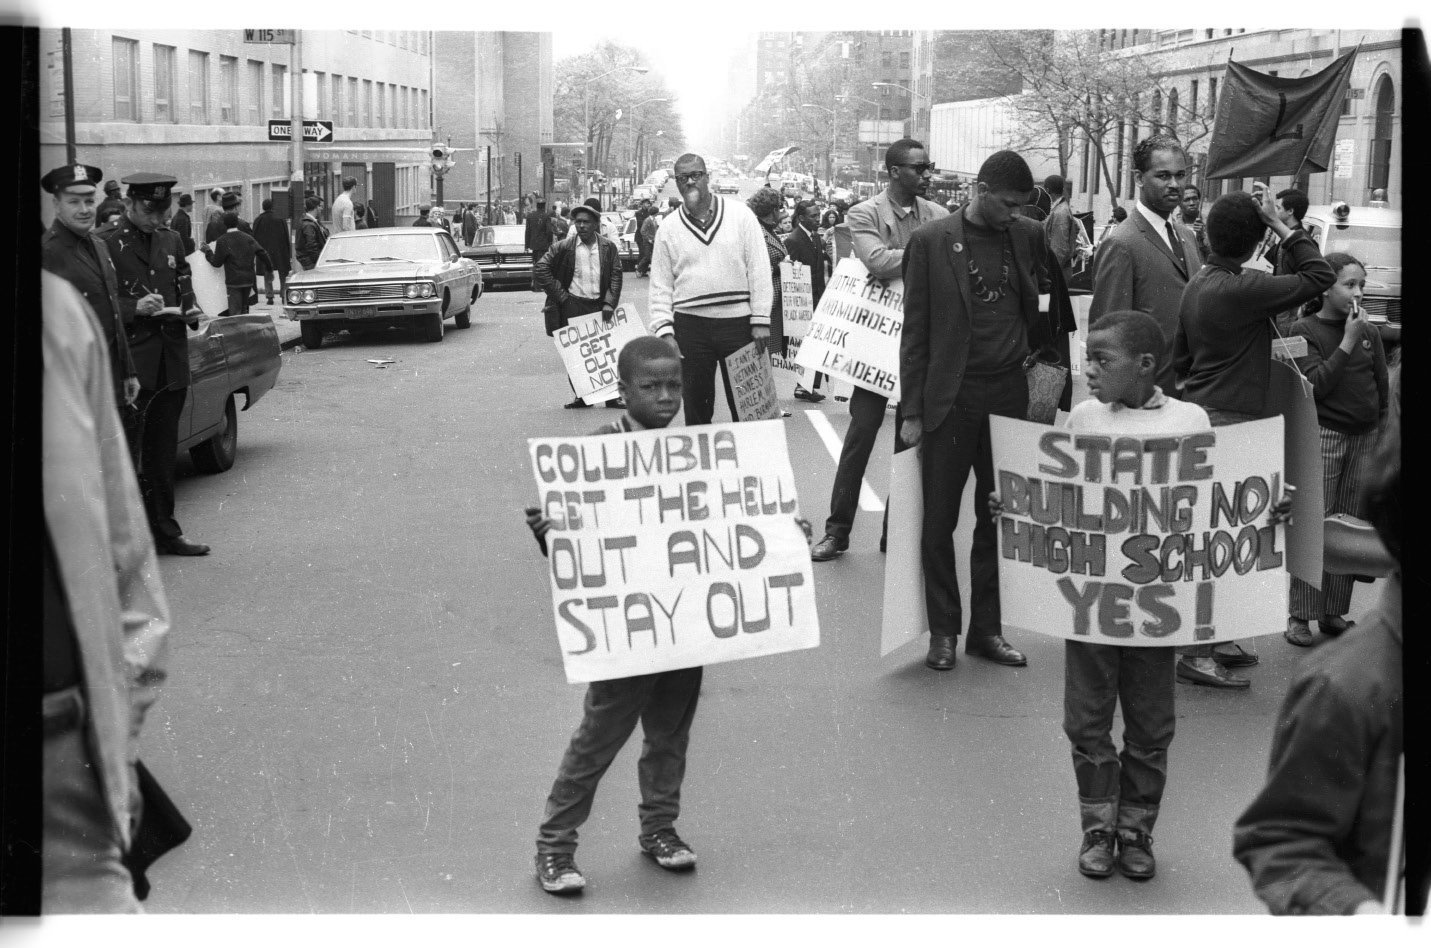 1968 protest, 2 black boys holding signs about Columbia